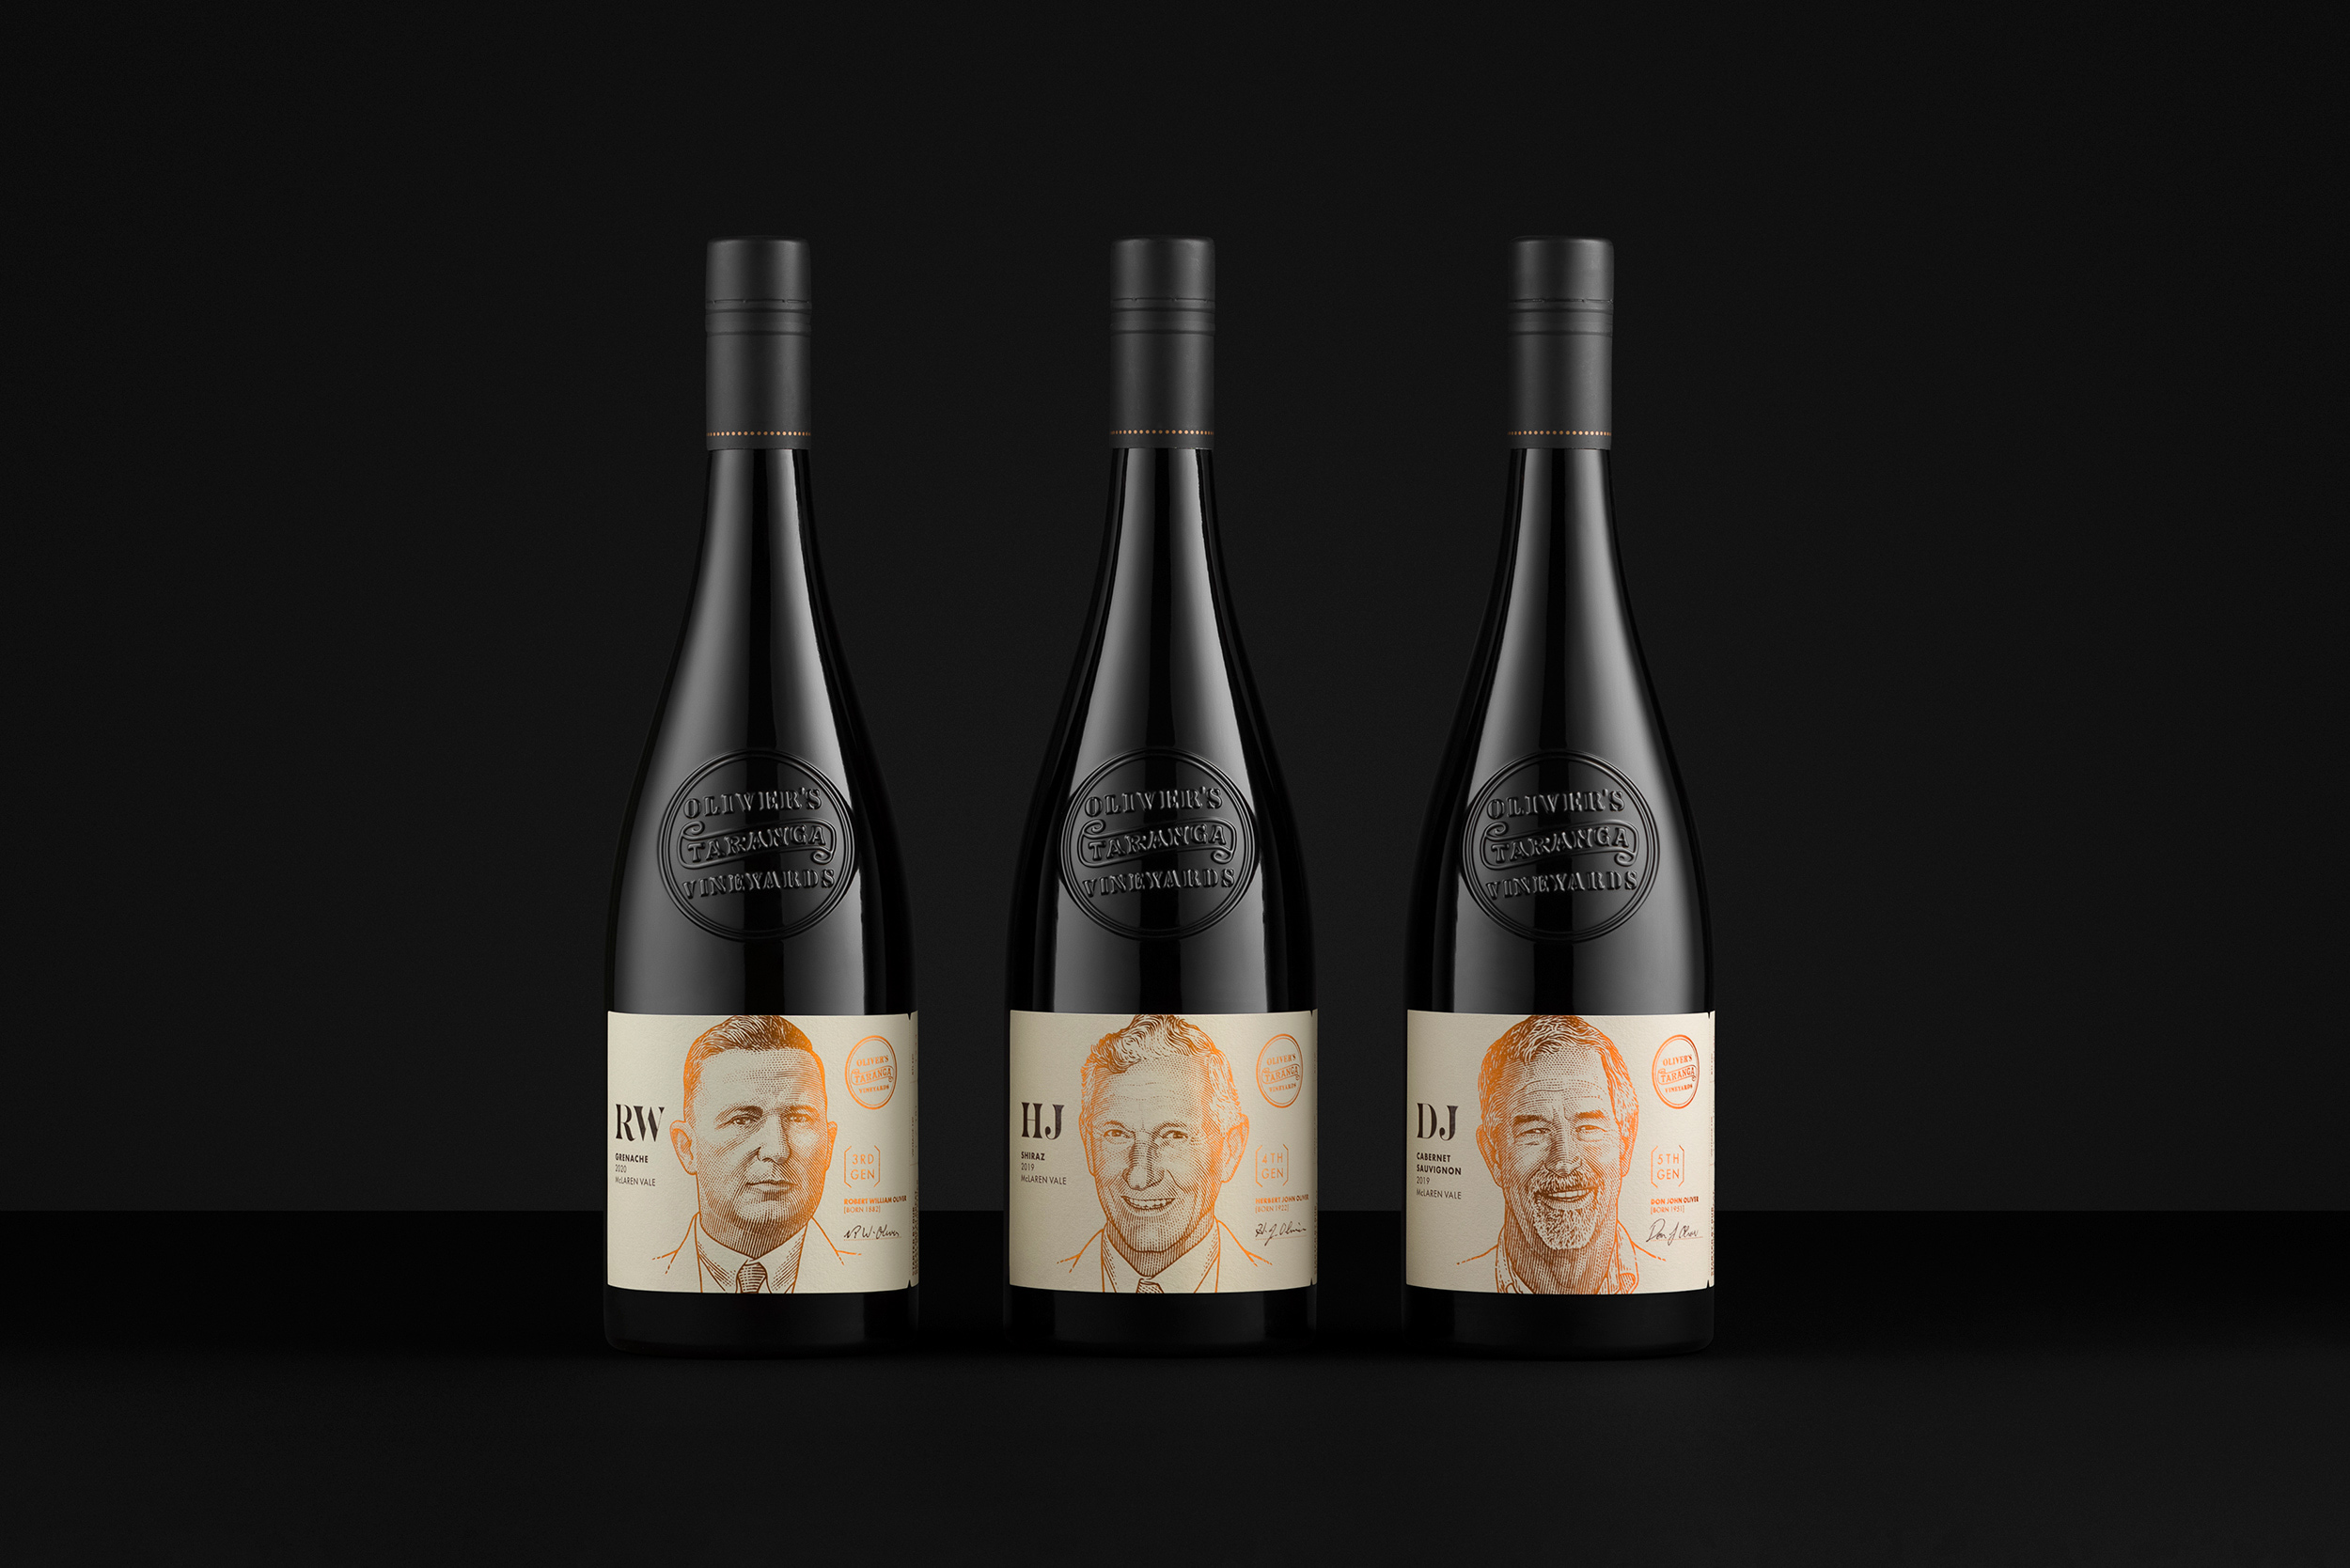 Elegant Packaging Design for Oliver’s Taranga’s ‘The Greats’ Collection